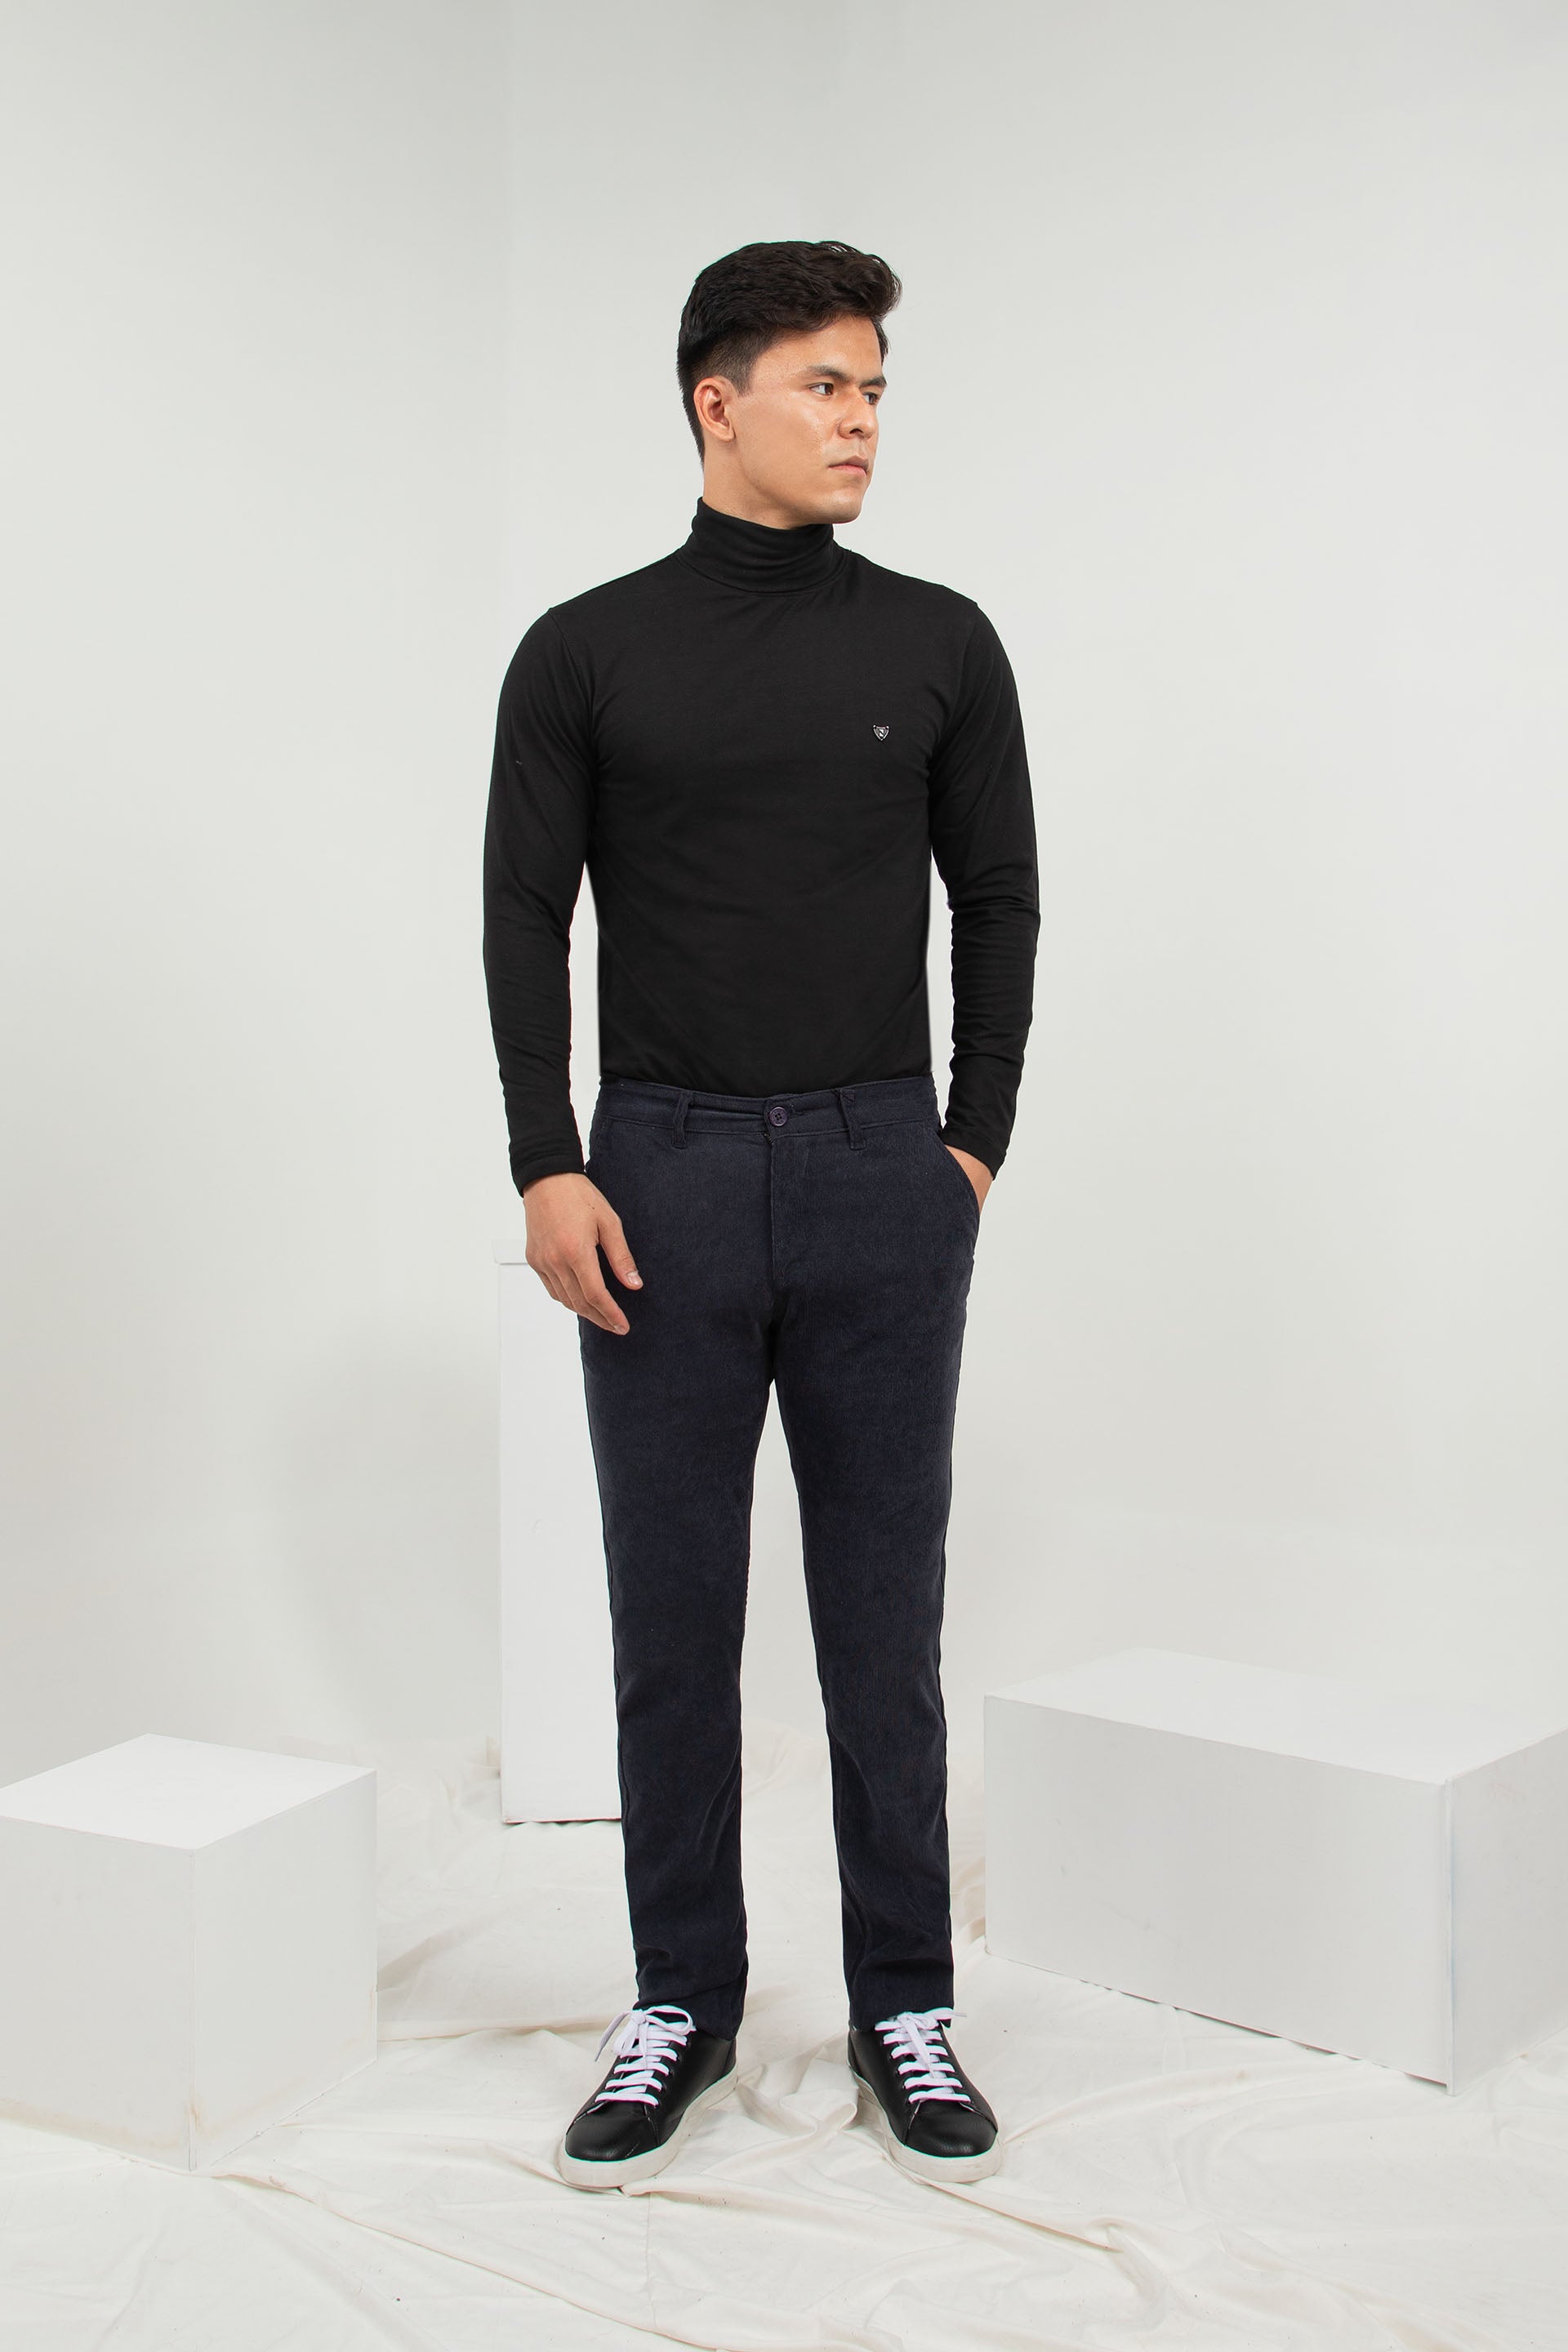 Get Chinos for Men from ONE Online Store